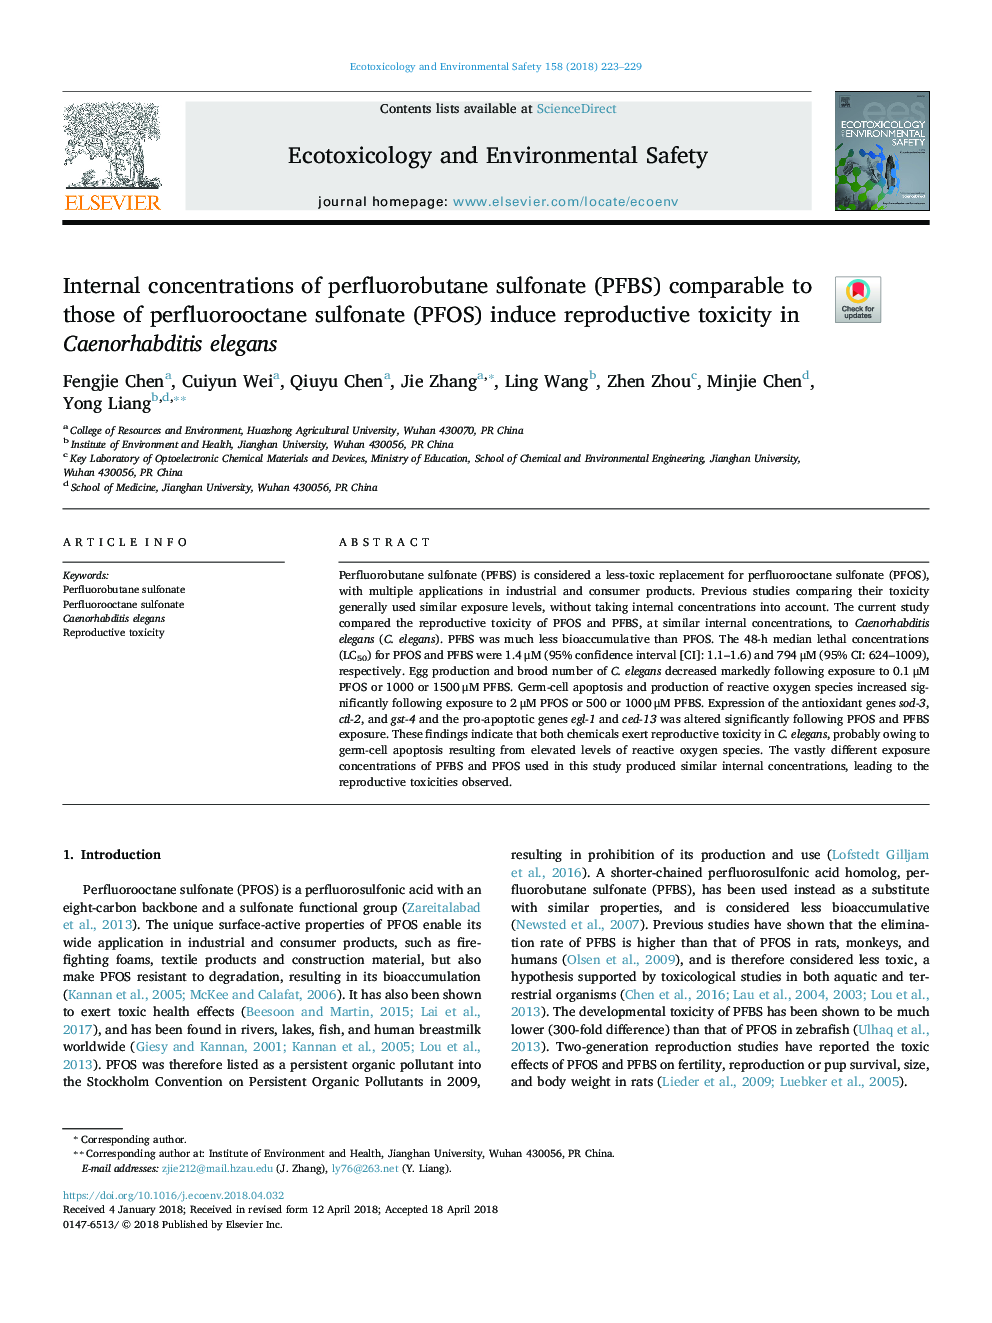 Internal concentrations of perfluorobutane sulfonate (PFBS) comparable to those of perfluorooctane sulfonate (PFOS) induce reproductive toxicity in Caenorhabditis elegans